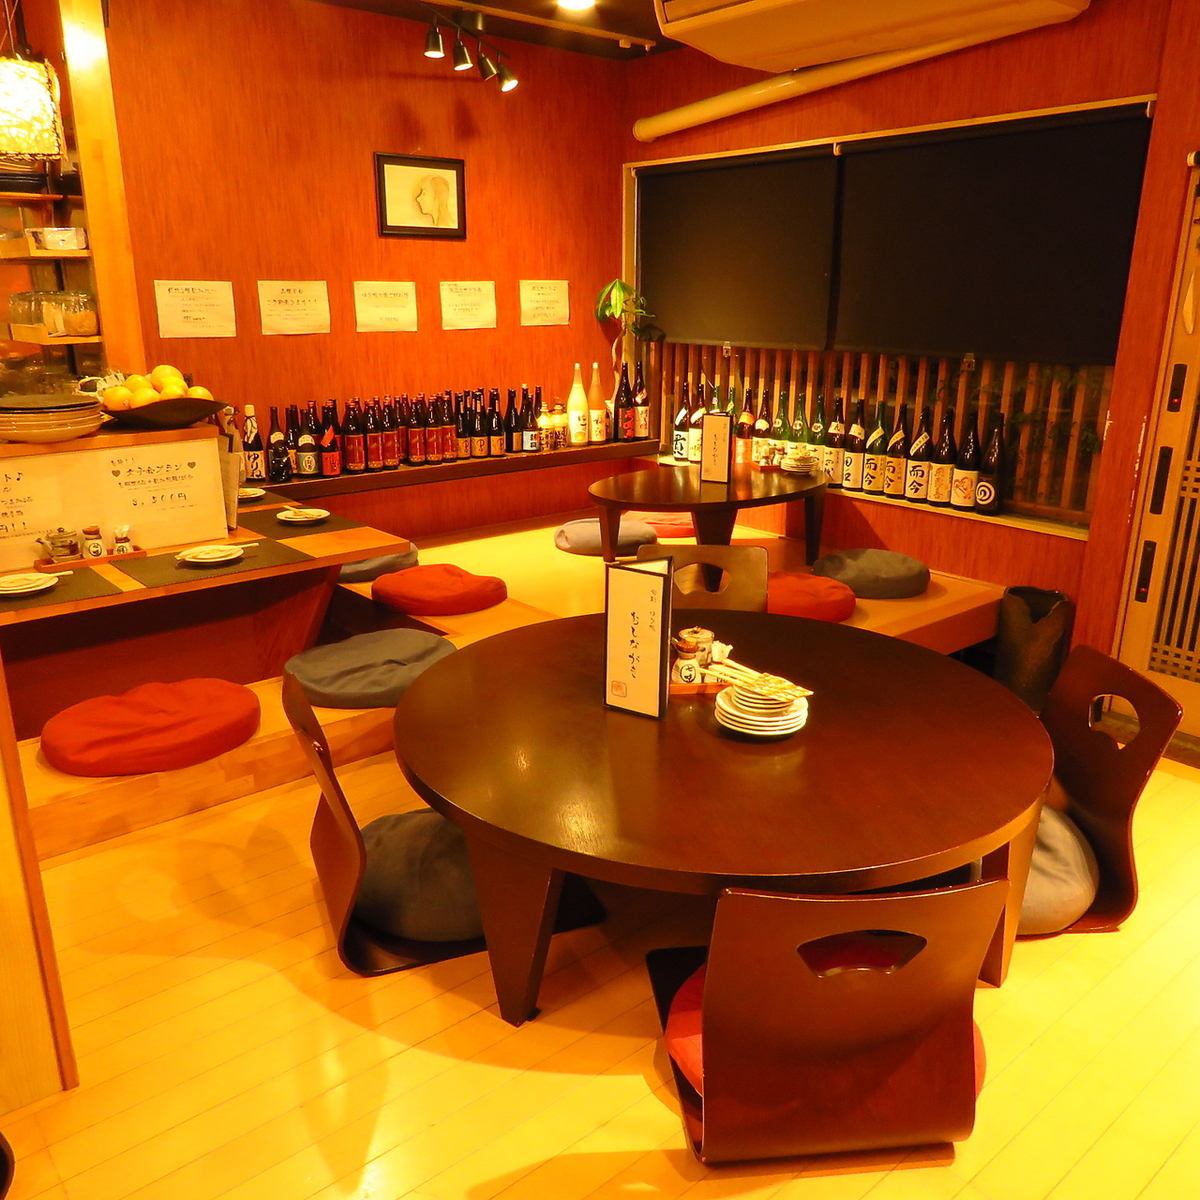 A small restaurant that serves seasonal dishes, the owner of a liquor store will tell you the sake that suits you.